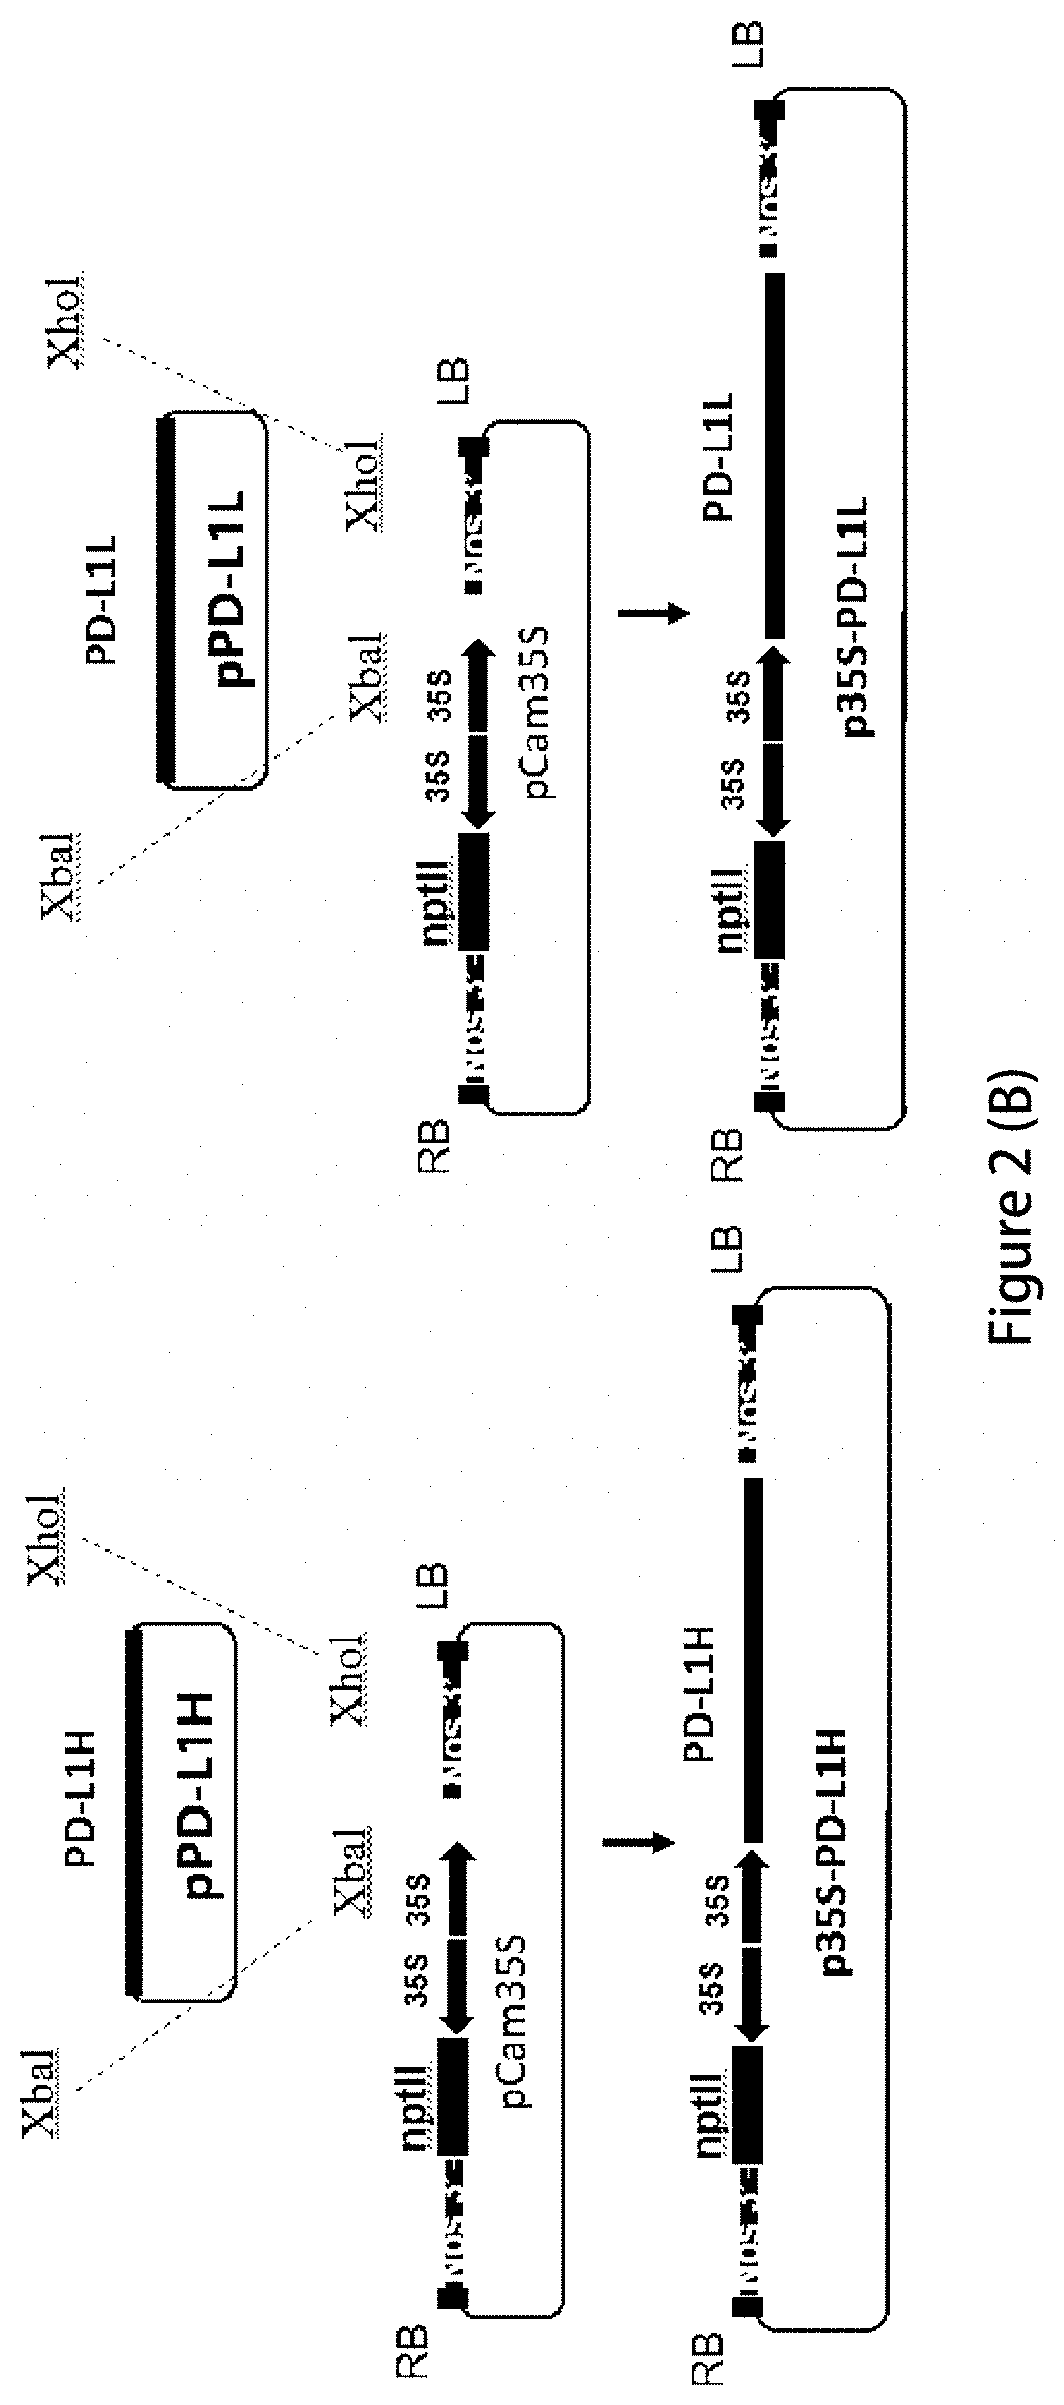 Application of plant as host in expressing pd-1 antibody and/or pd-l1 antibody